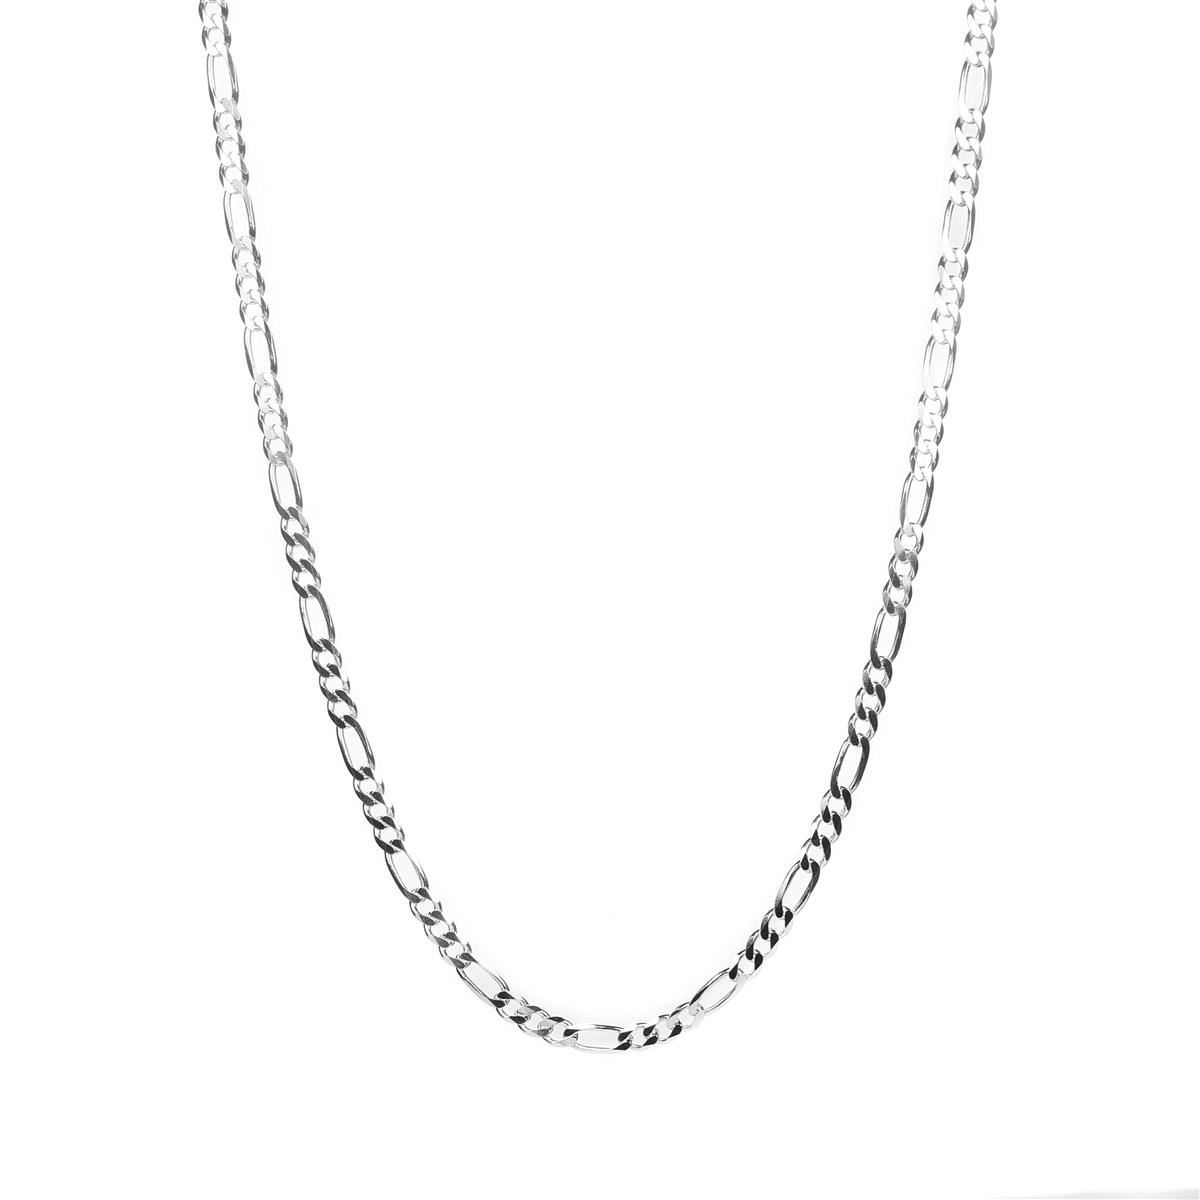 Pori Jewelers 925 Sterling Silver Figaro Chain Necklace Lobster Claw Made in Italy 3.0MM-10.5MM 